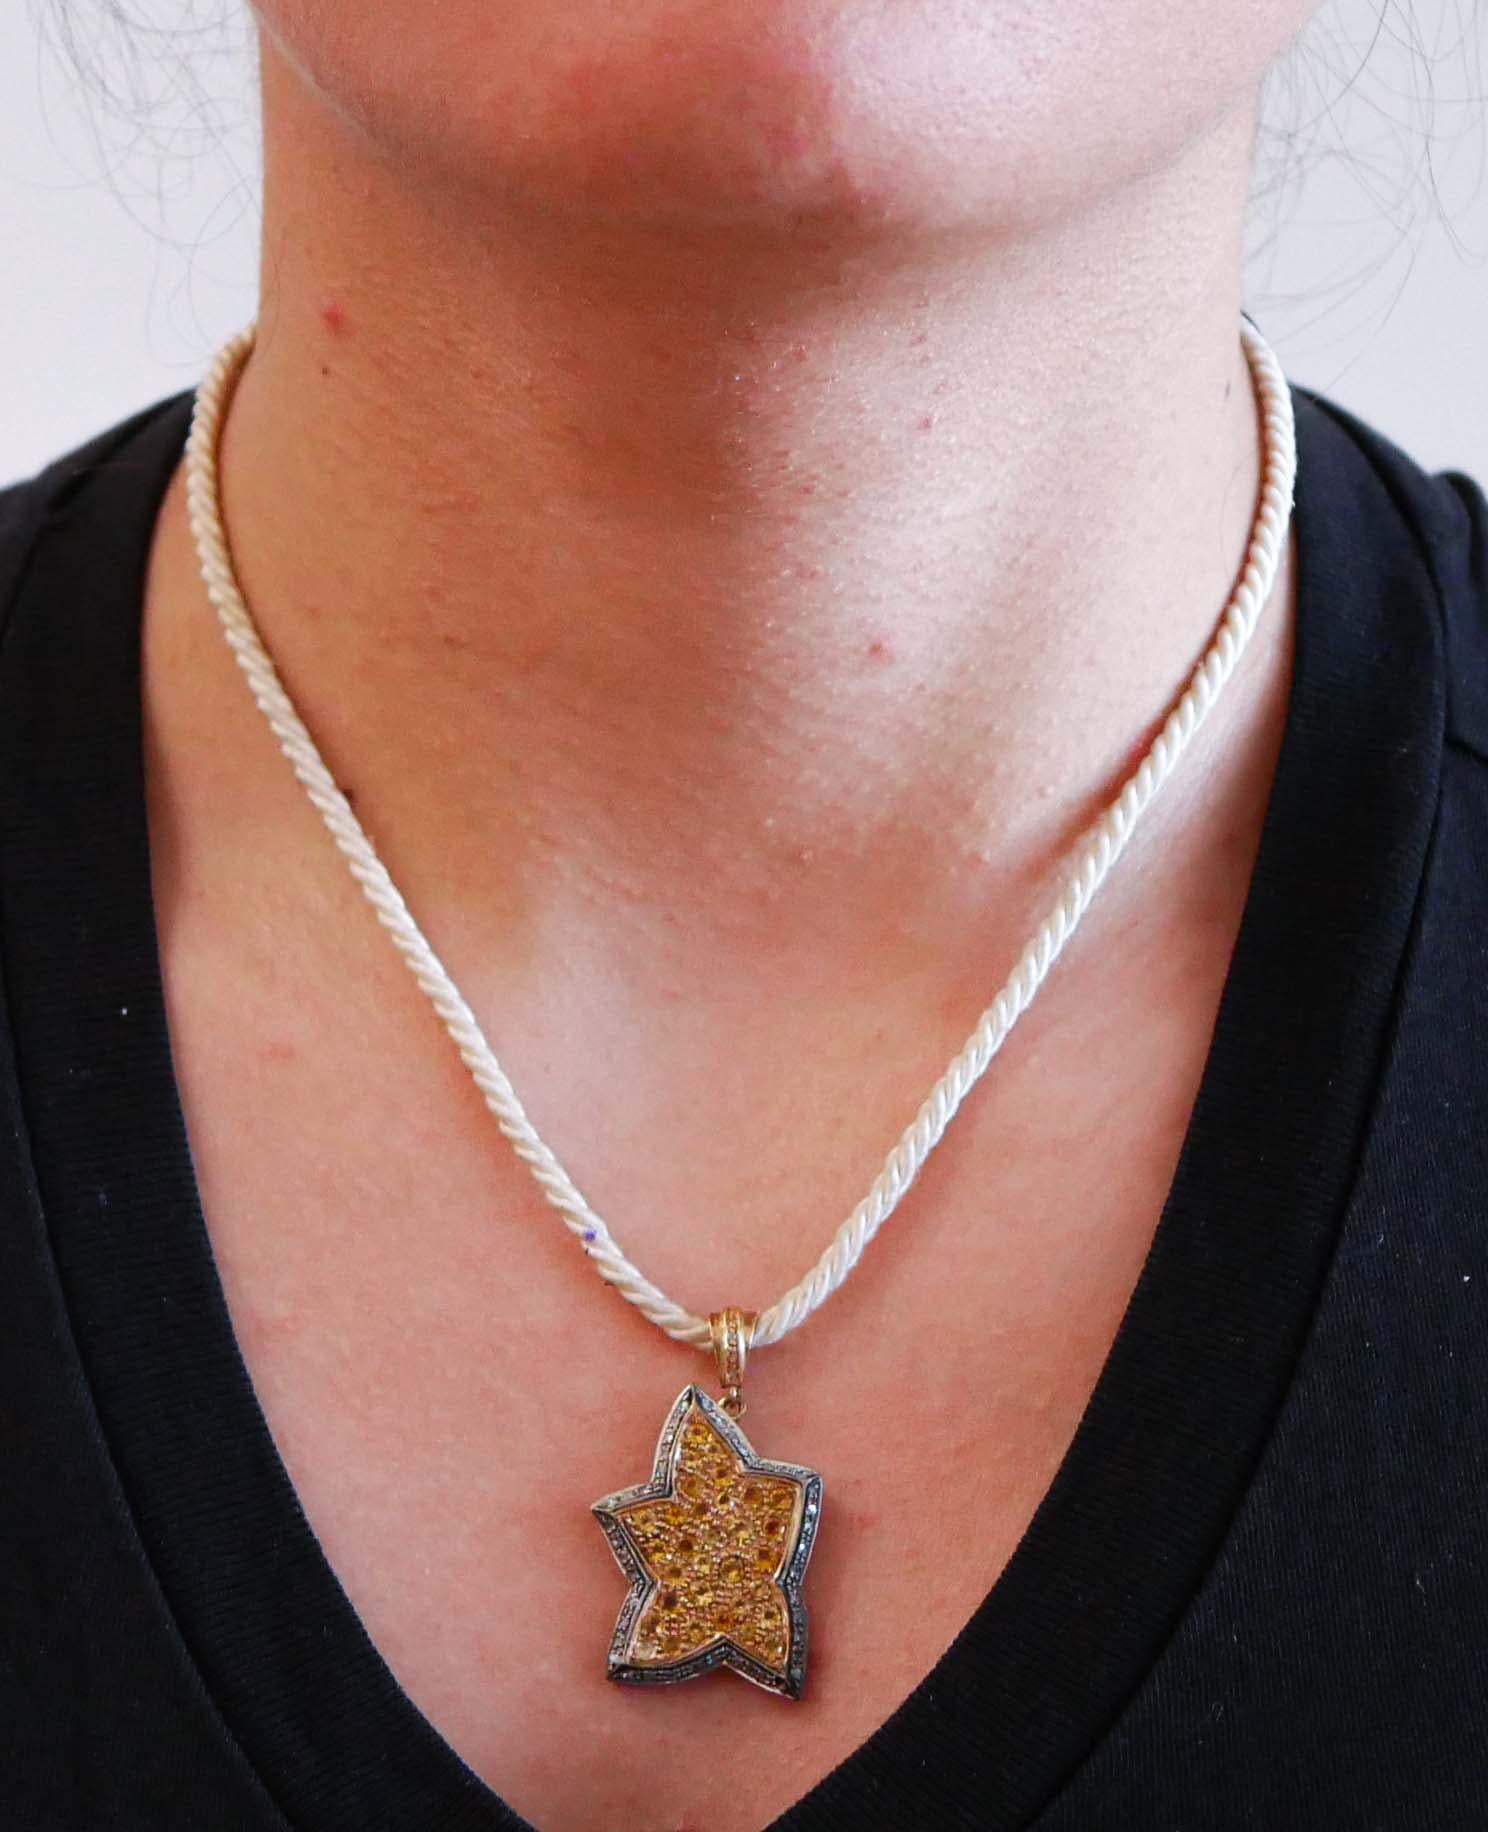 Women's Topazs, Diamonds, 14 Karat Rose Gold and Silver Star Pendant Necklace. For Sale